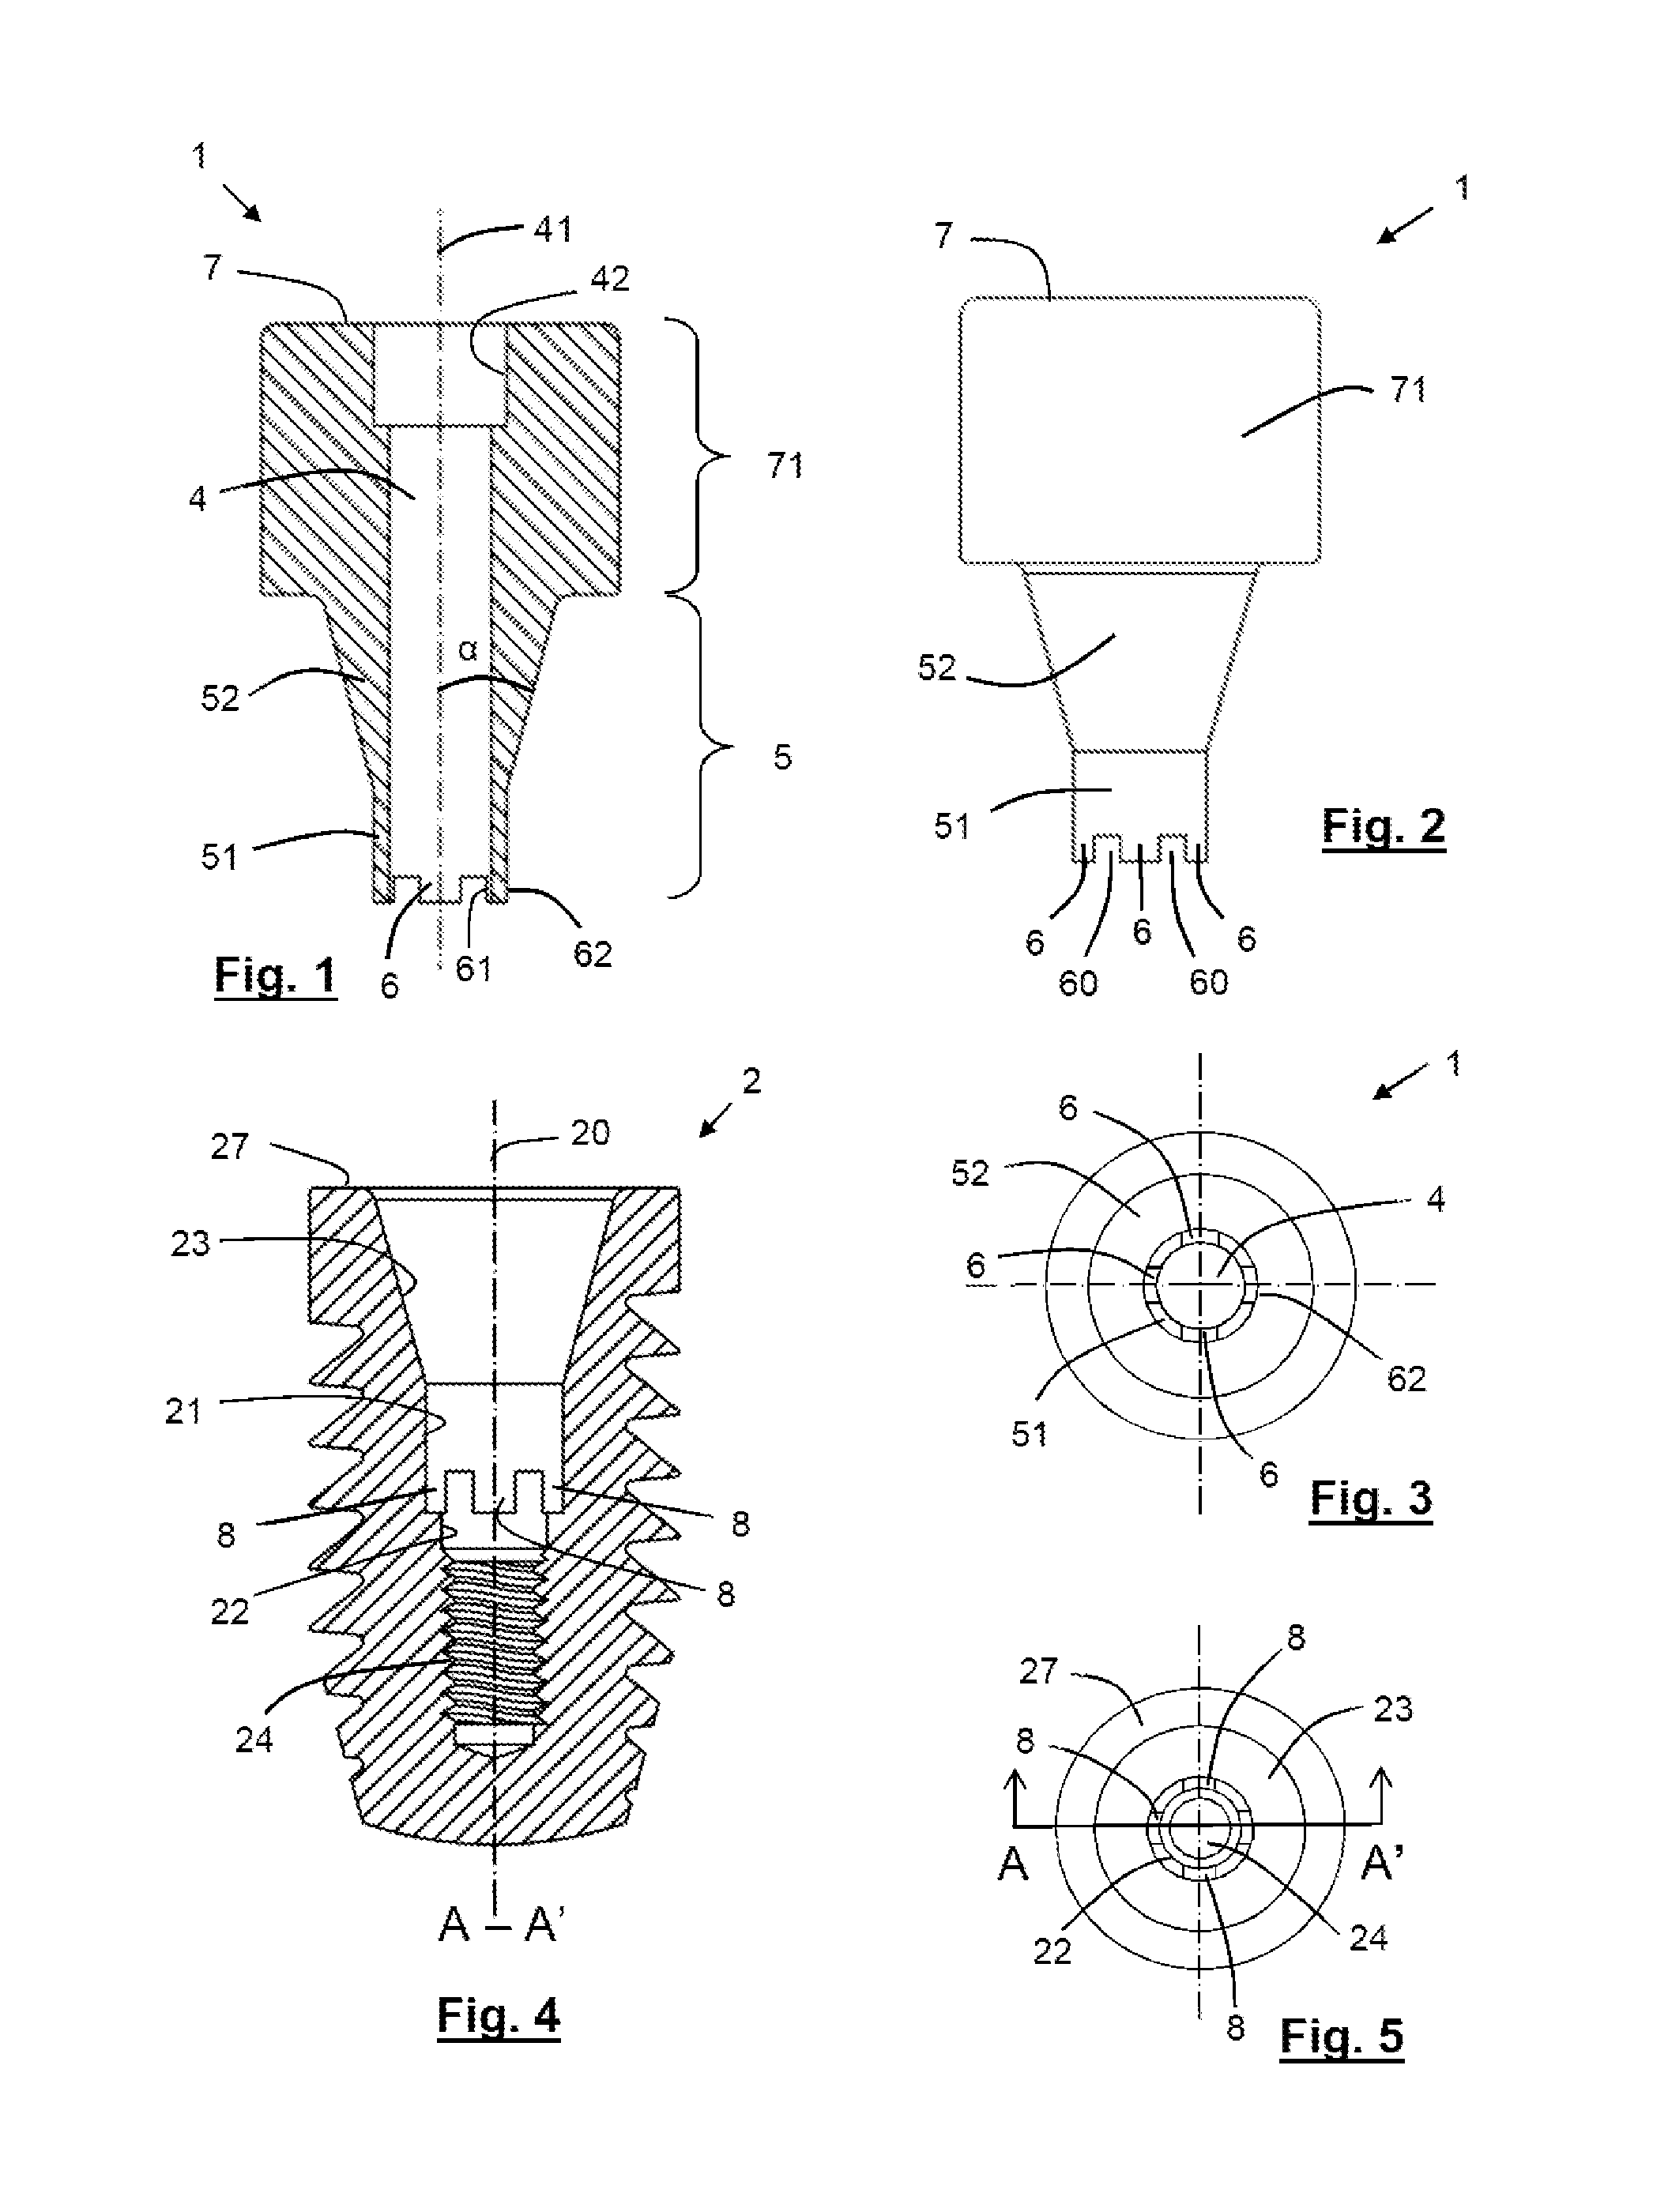 Dental abutment, abutment and screw assembly, and dental implant system